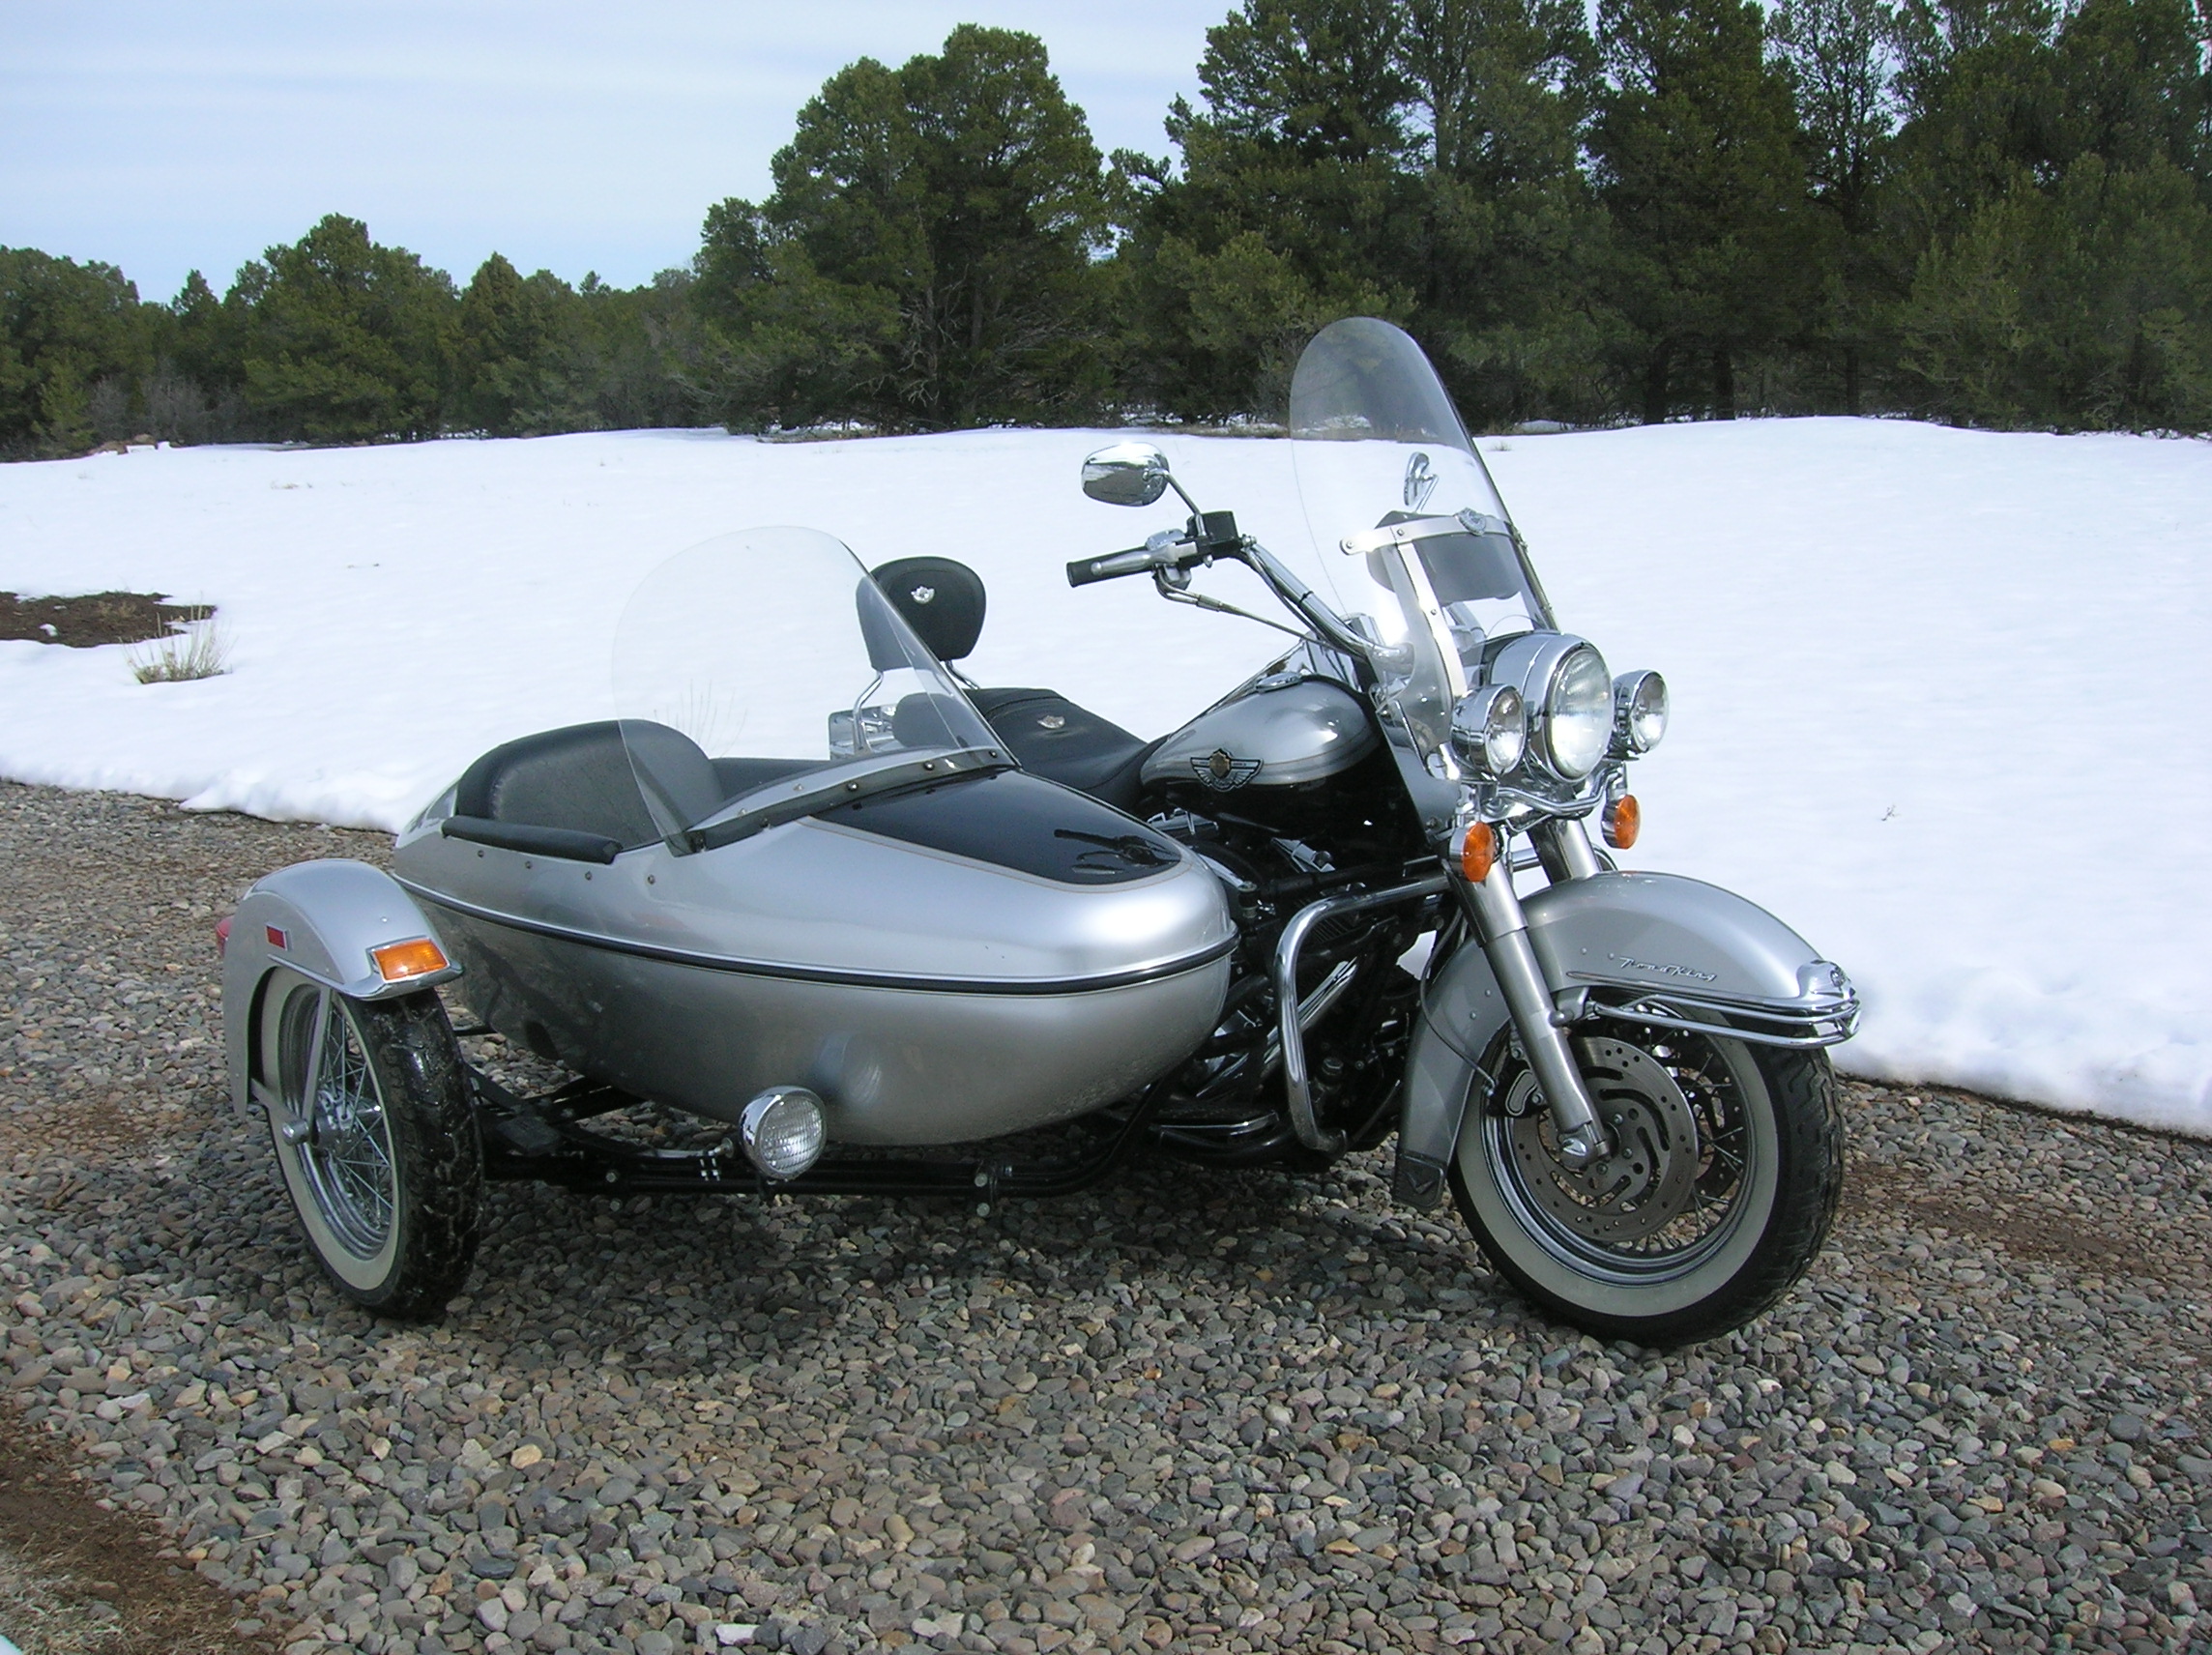 Show us your sidecars - Harley Davidson Forums